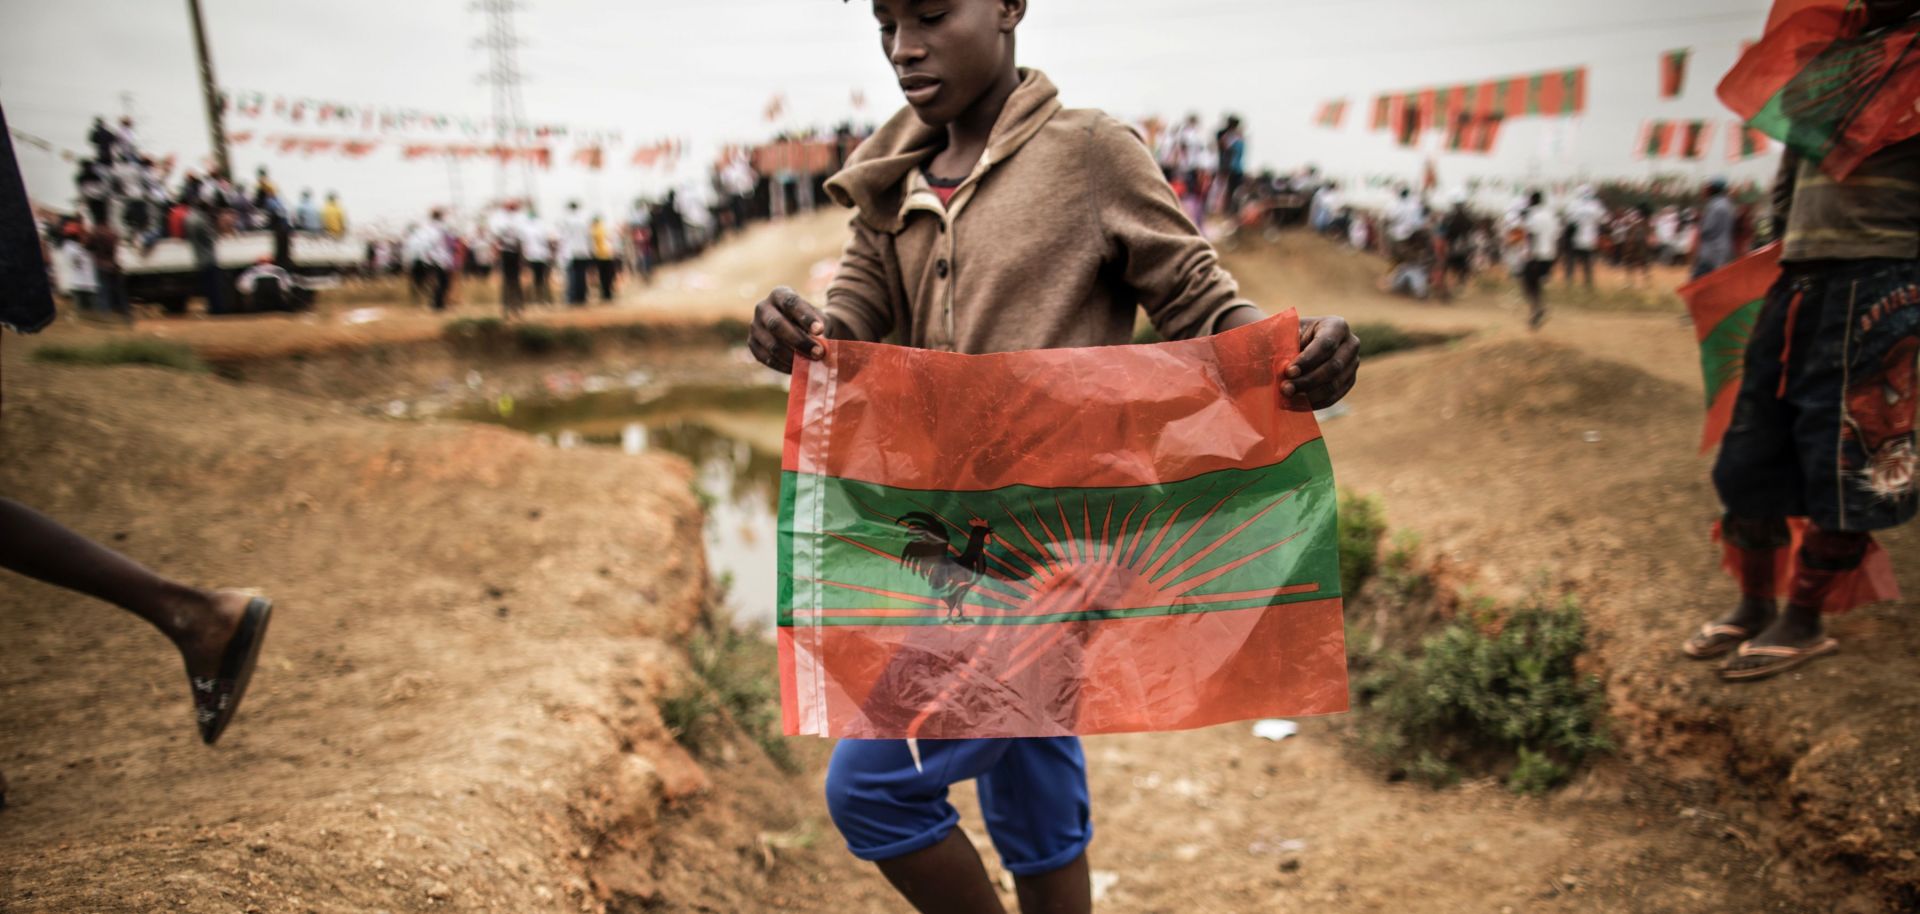 In Angola, a supporter brandishes the flag of the opposition National Union for the Total Independence of Angola party just days before the country's general elections.